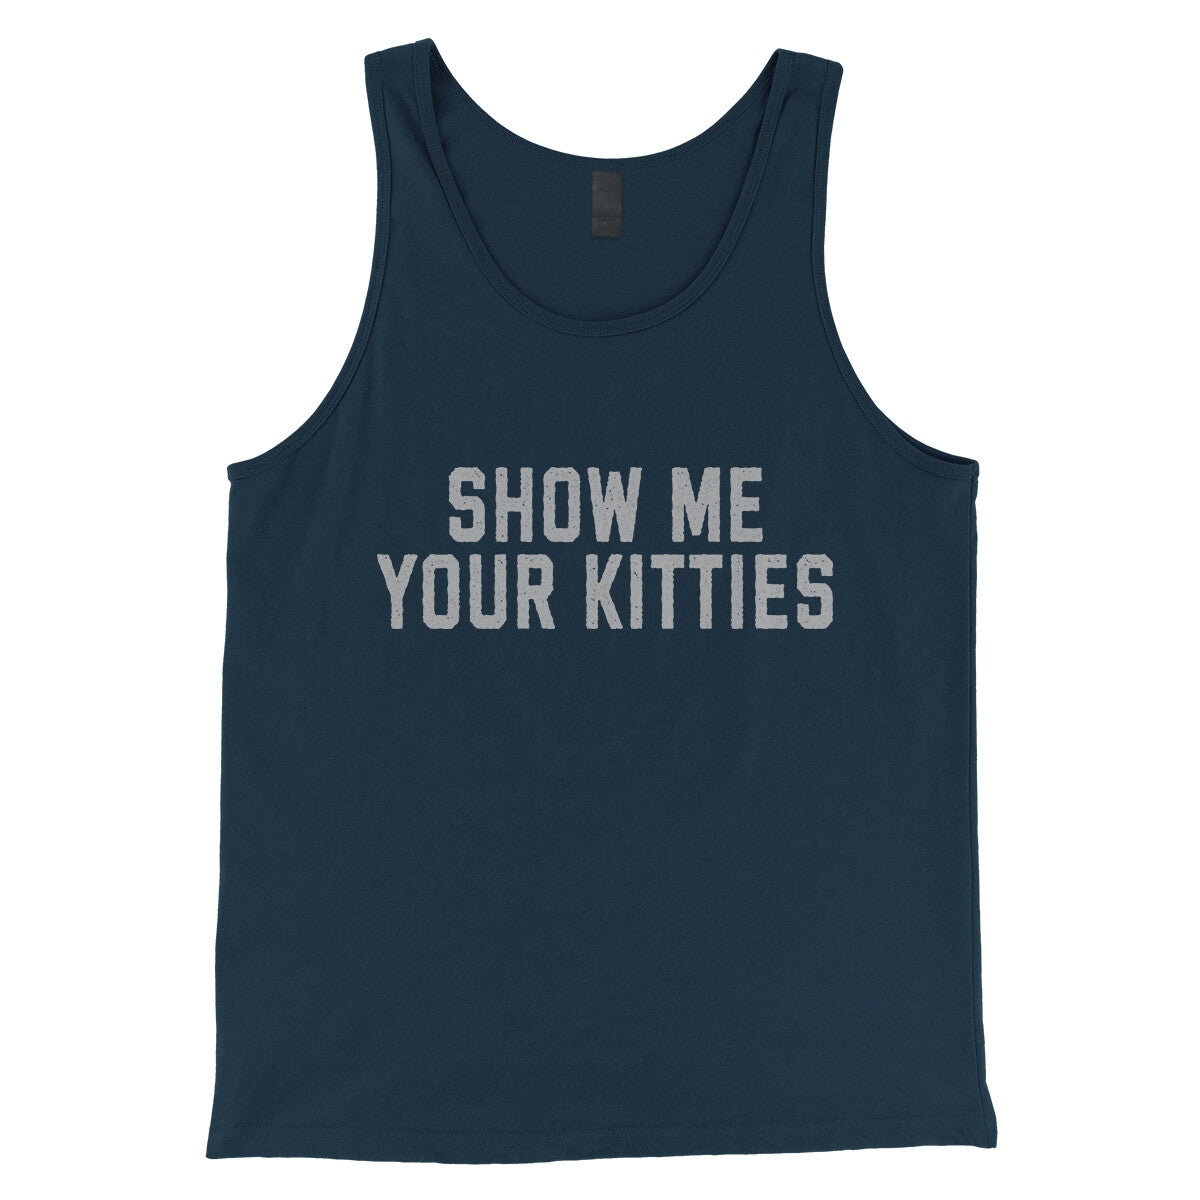 Show me Your Kitties in Navy Color